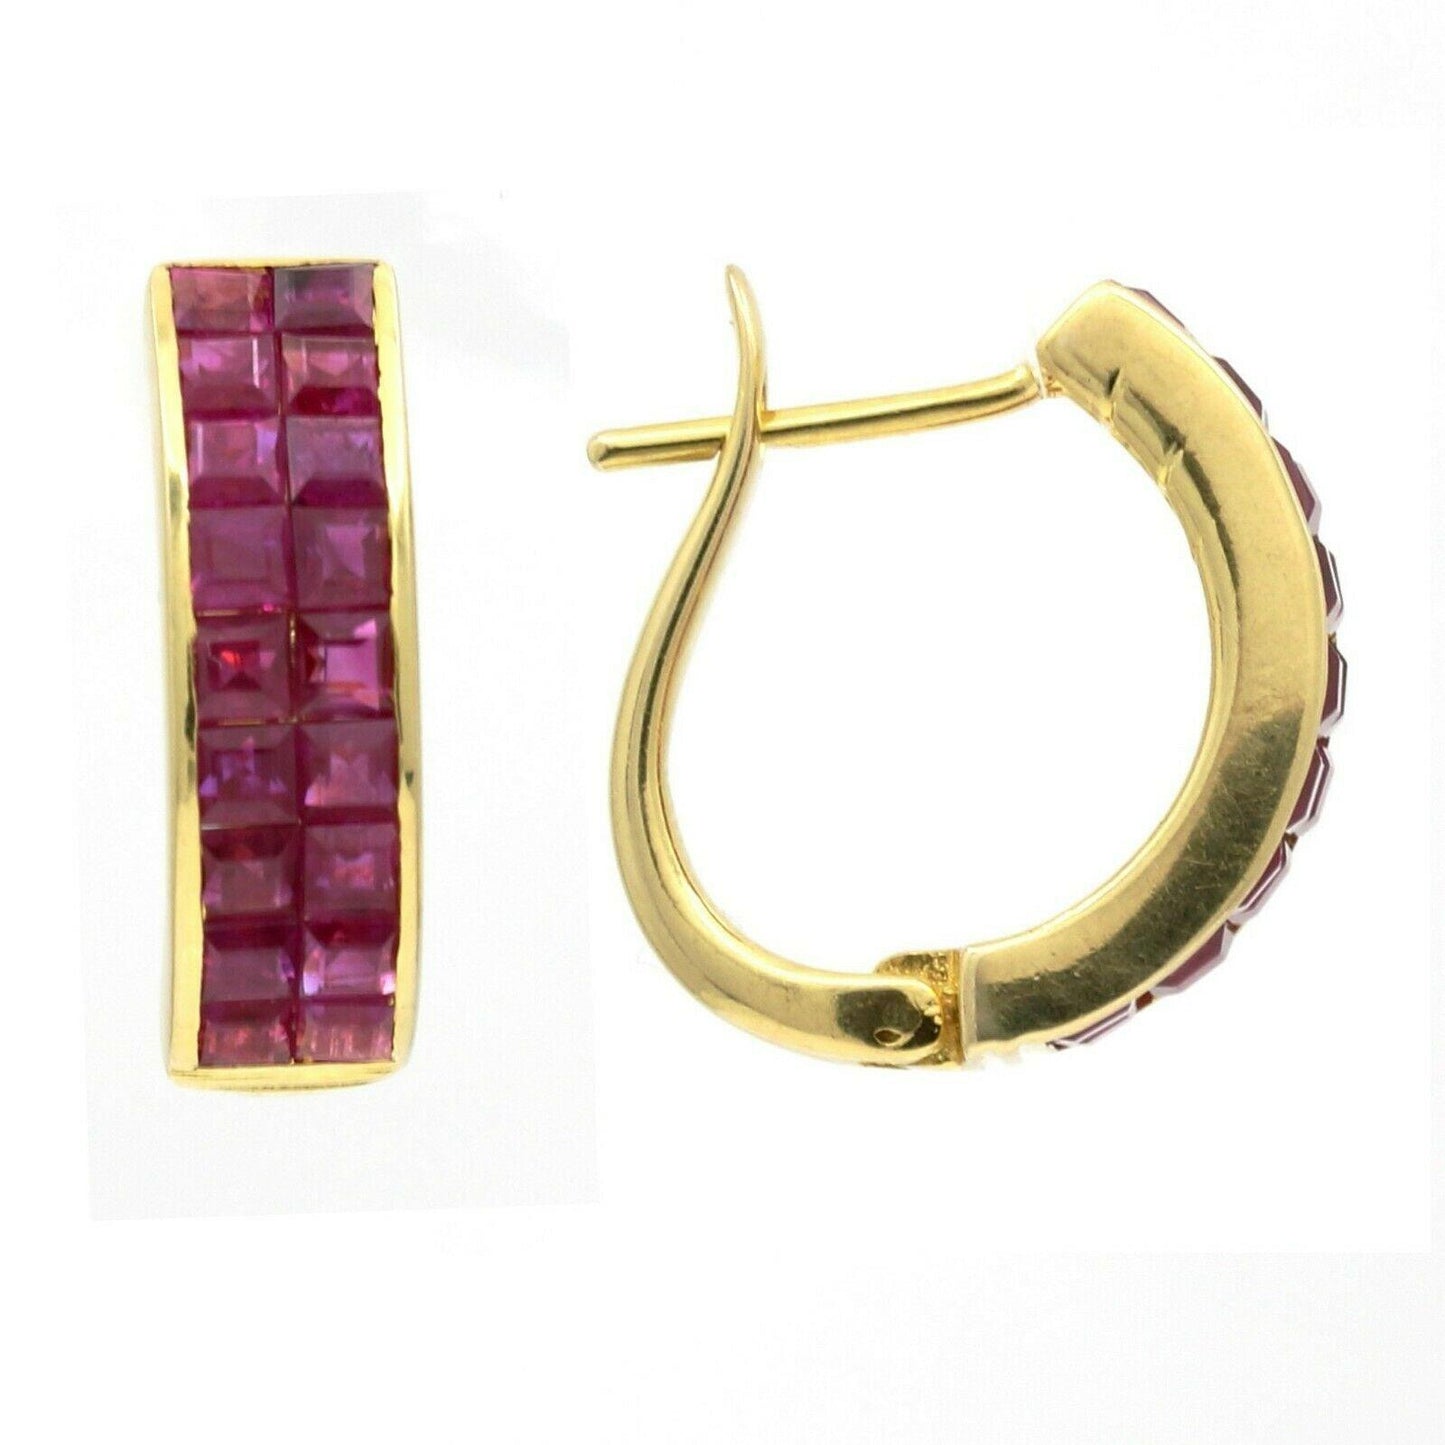 Women's Invisible Set Ruby Half Hoop Earrings in 18k Yellow Gold (3.50 cttw) - 31 Jewels Inc.